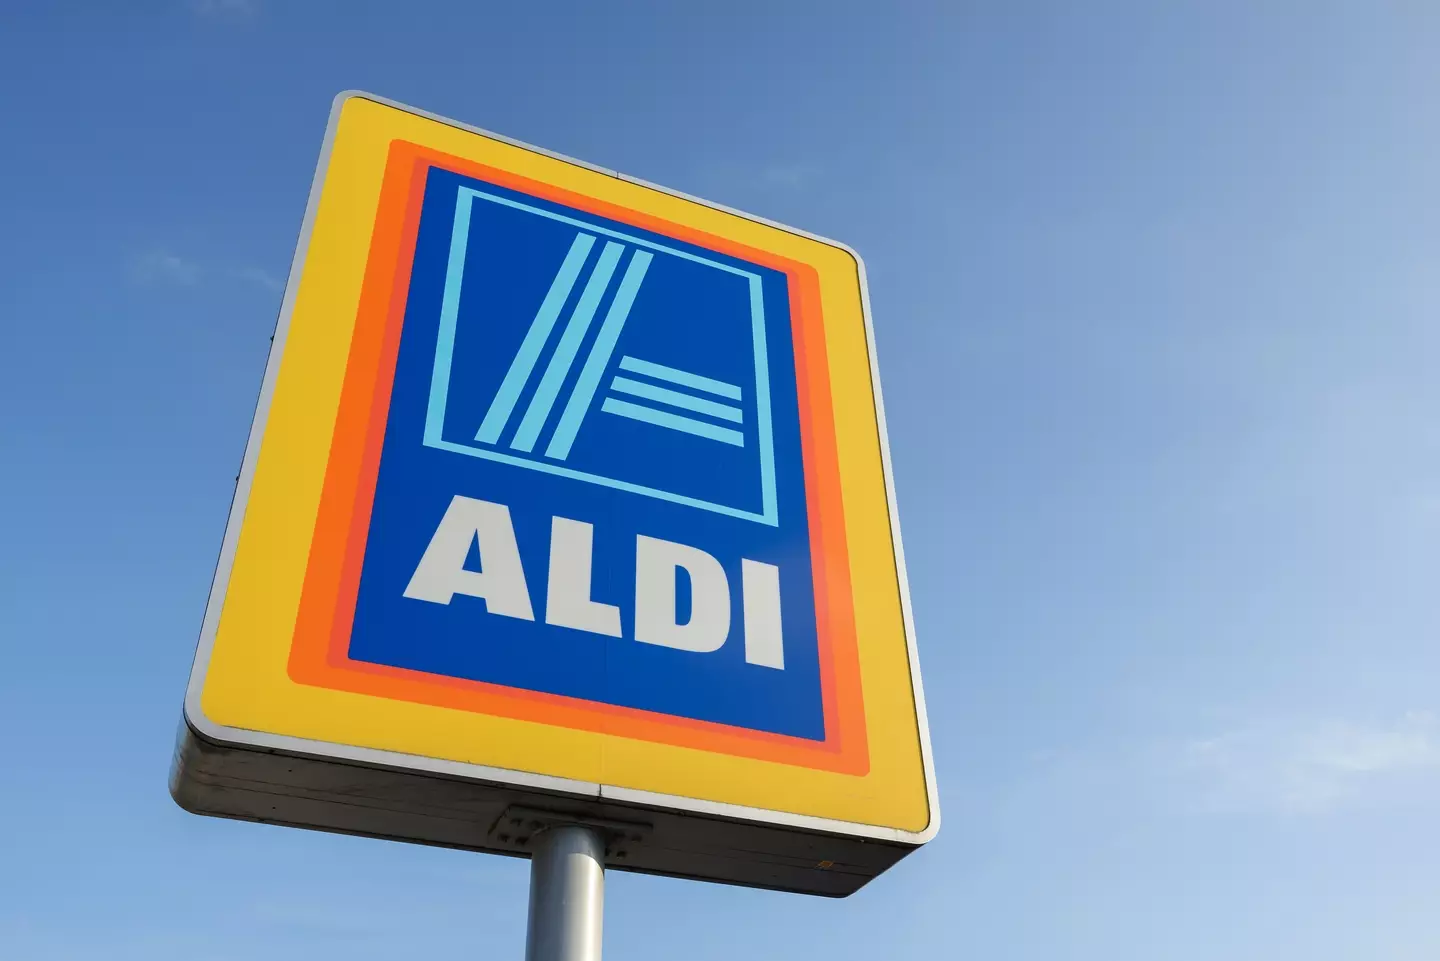 Aldi has the most hygienic stores in the UK.